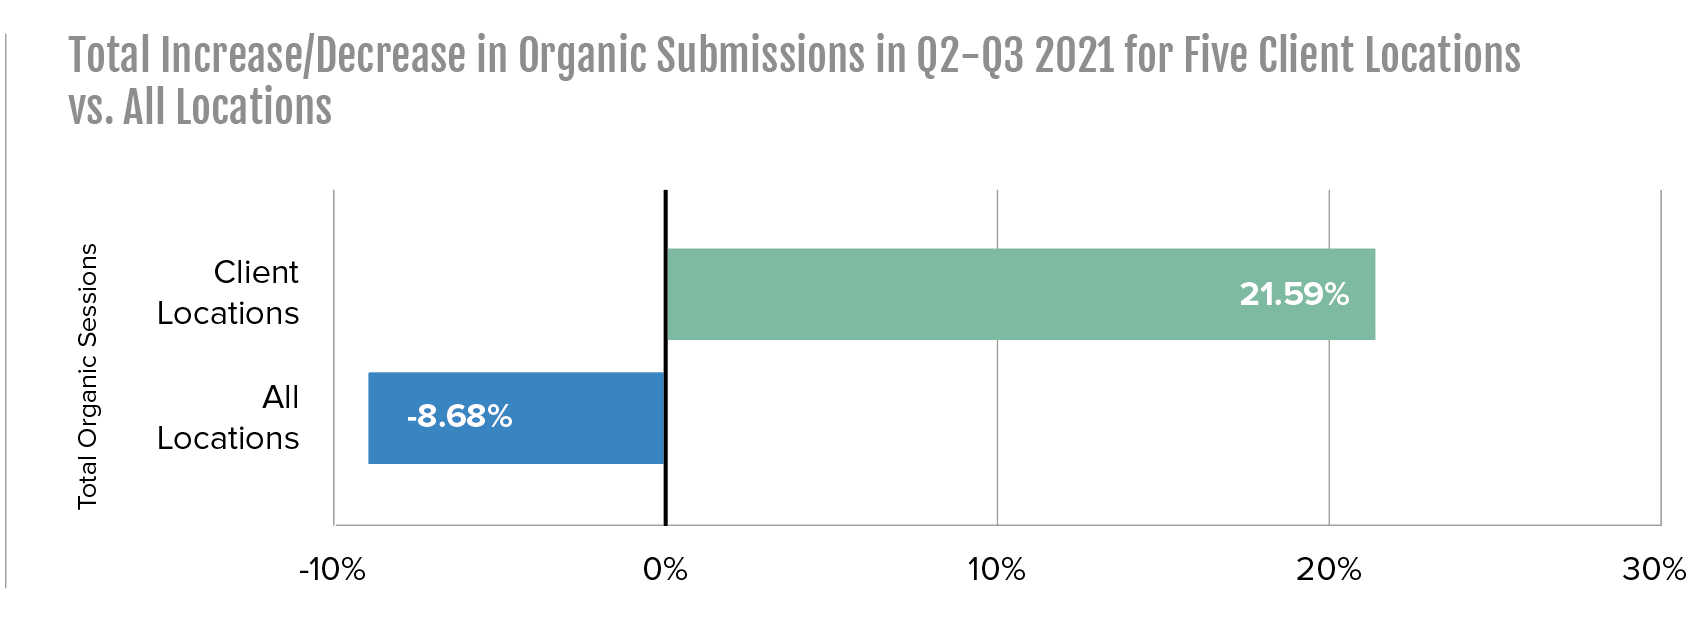 total change in organic submissions in Q2 through Q3 for 5 client locations vs all locations